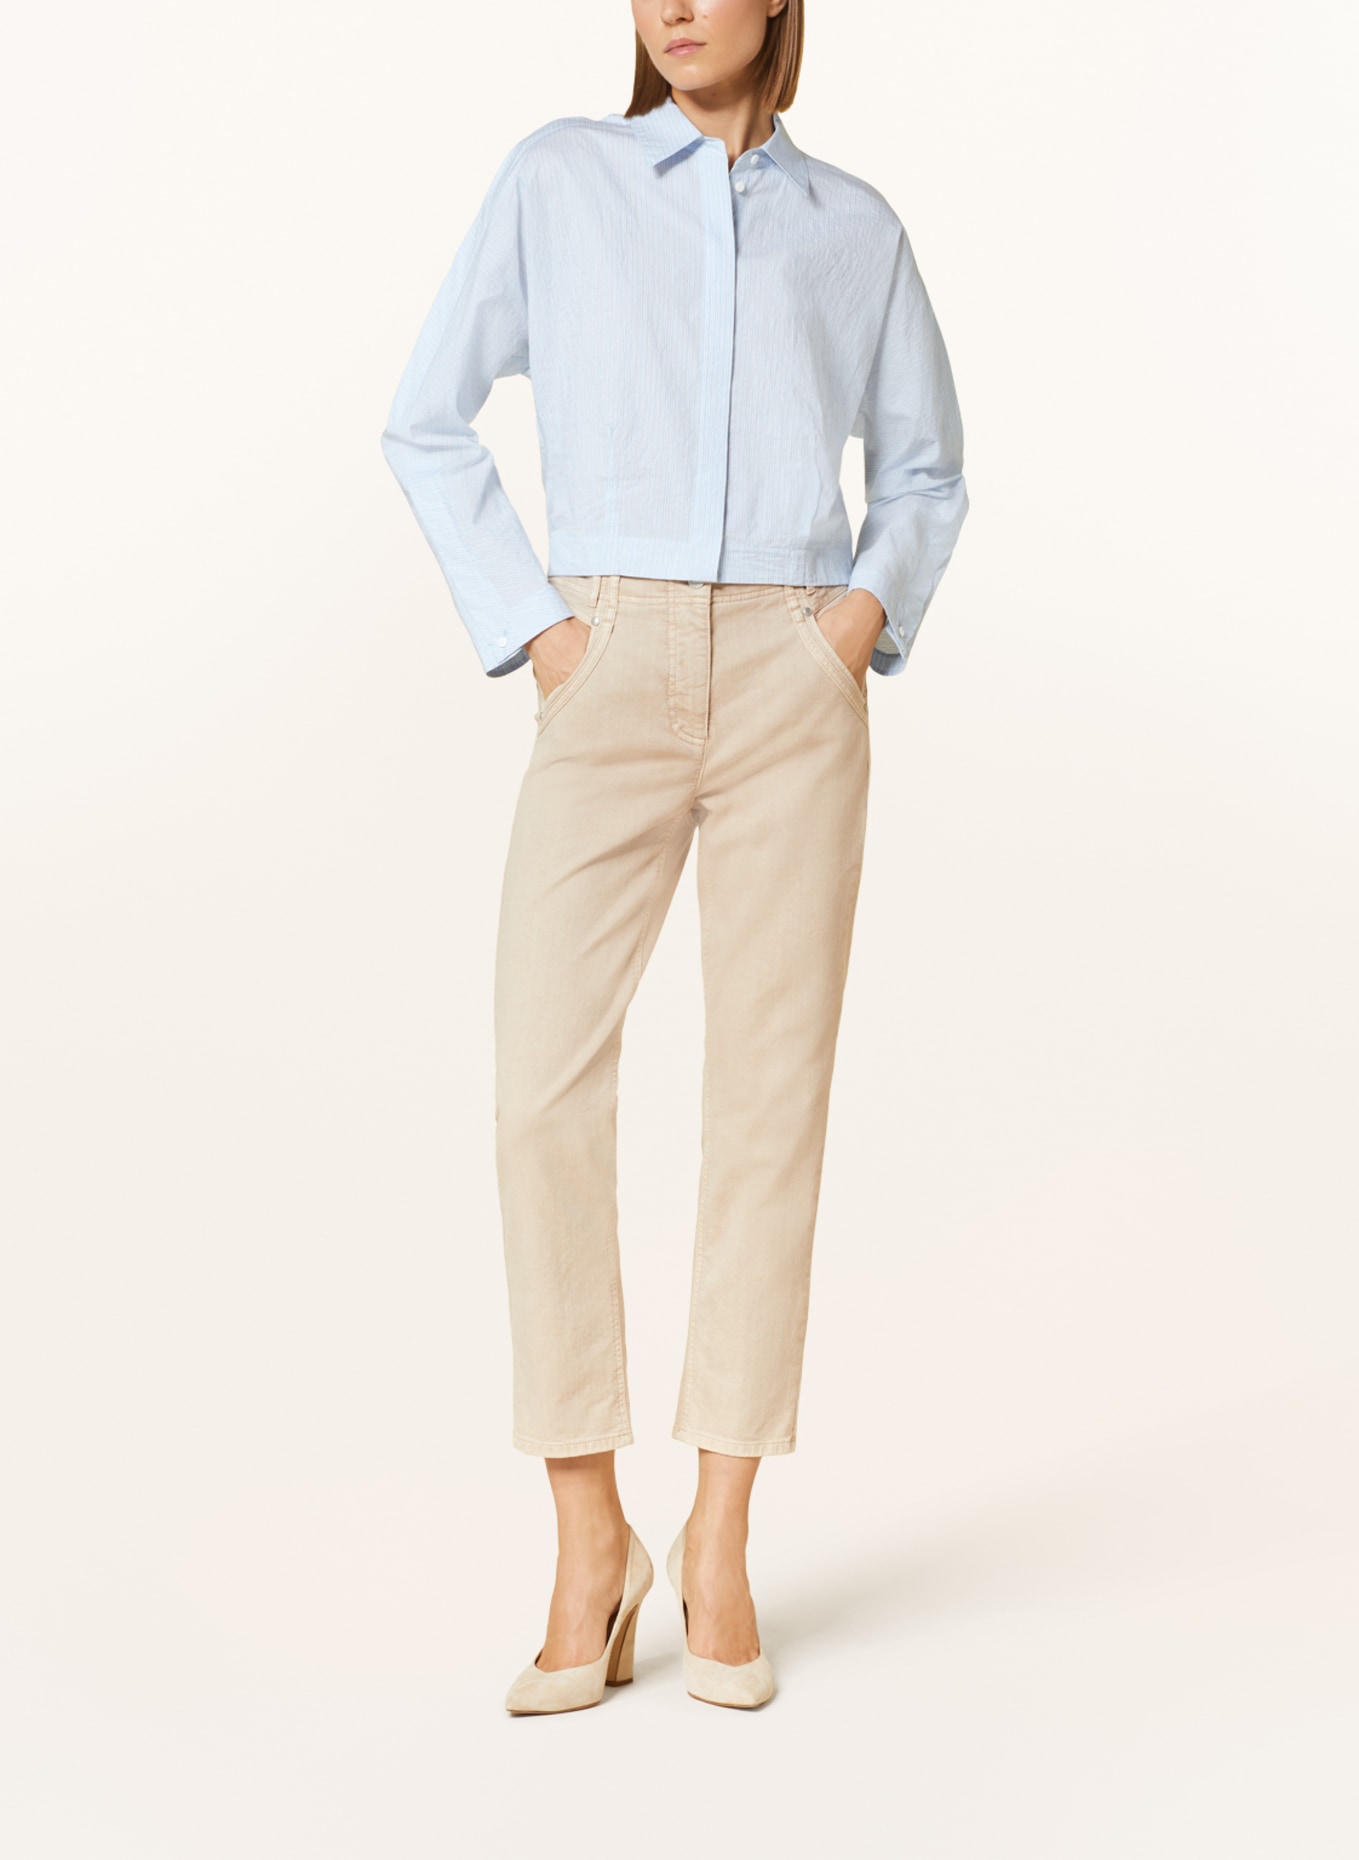 LUISA CERANO Cropped shirt blouse, Color: LIGHT BLUE/ WHITE (Image 2)